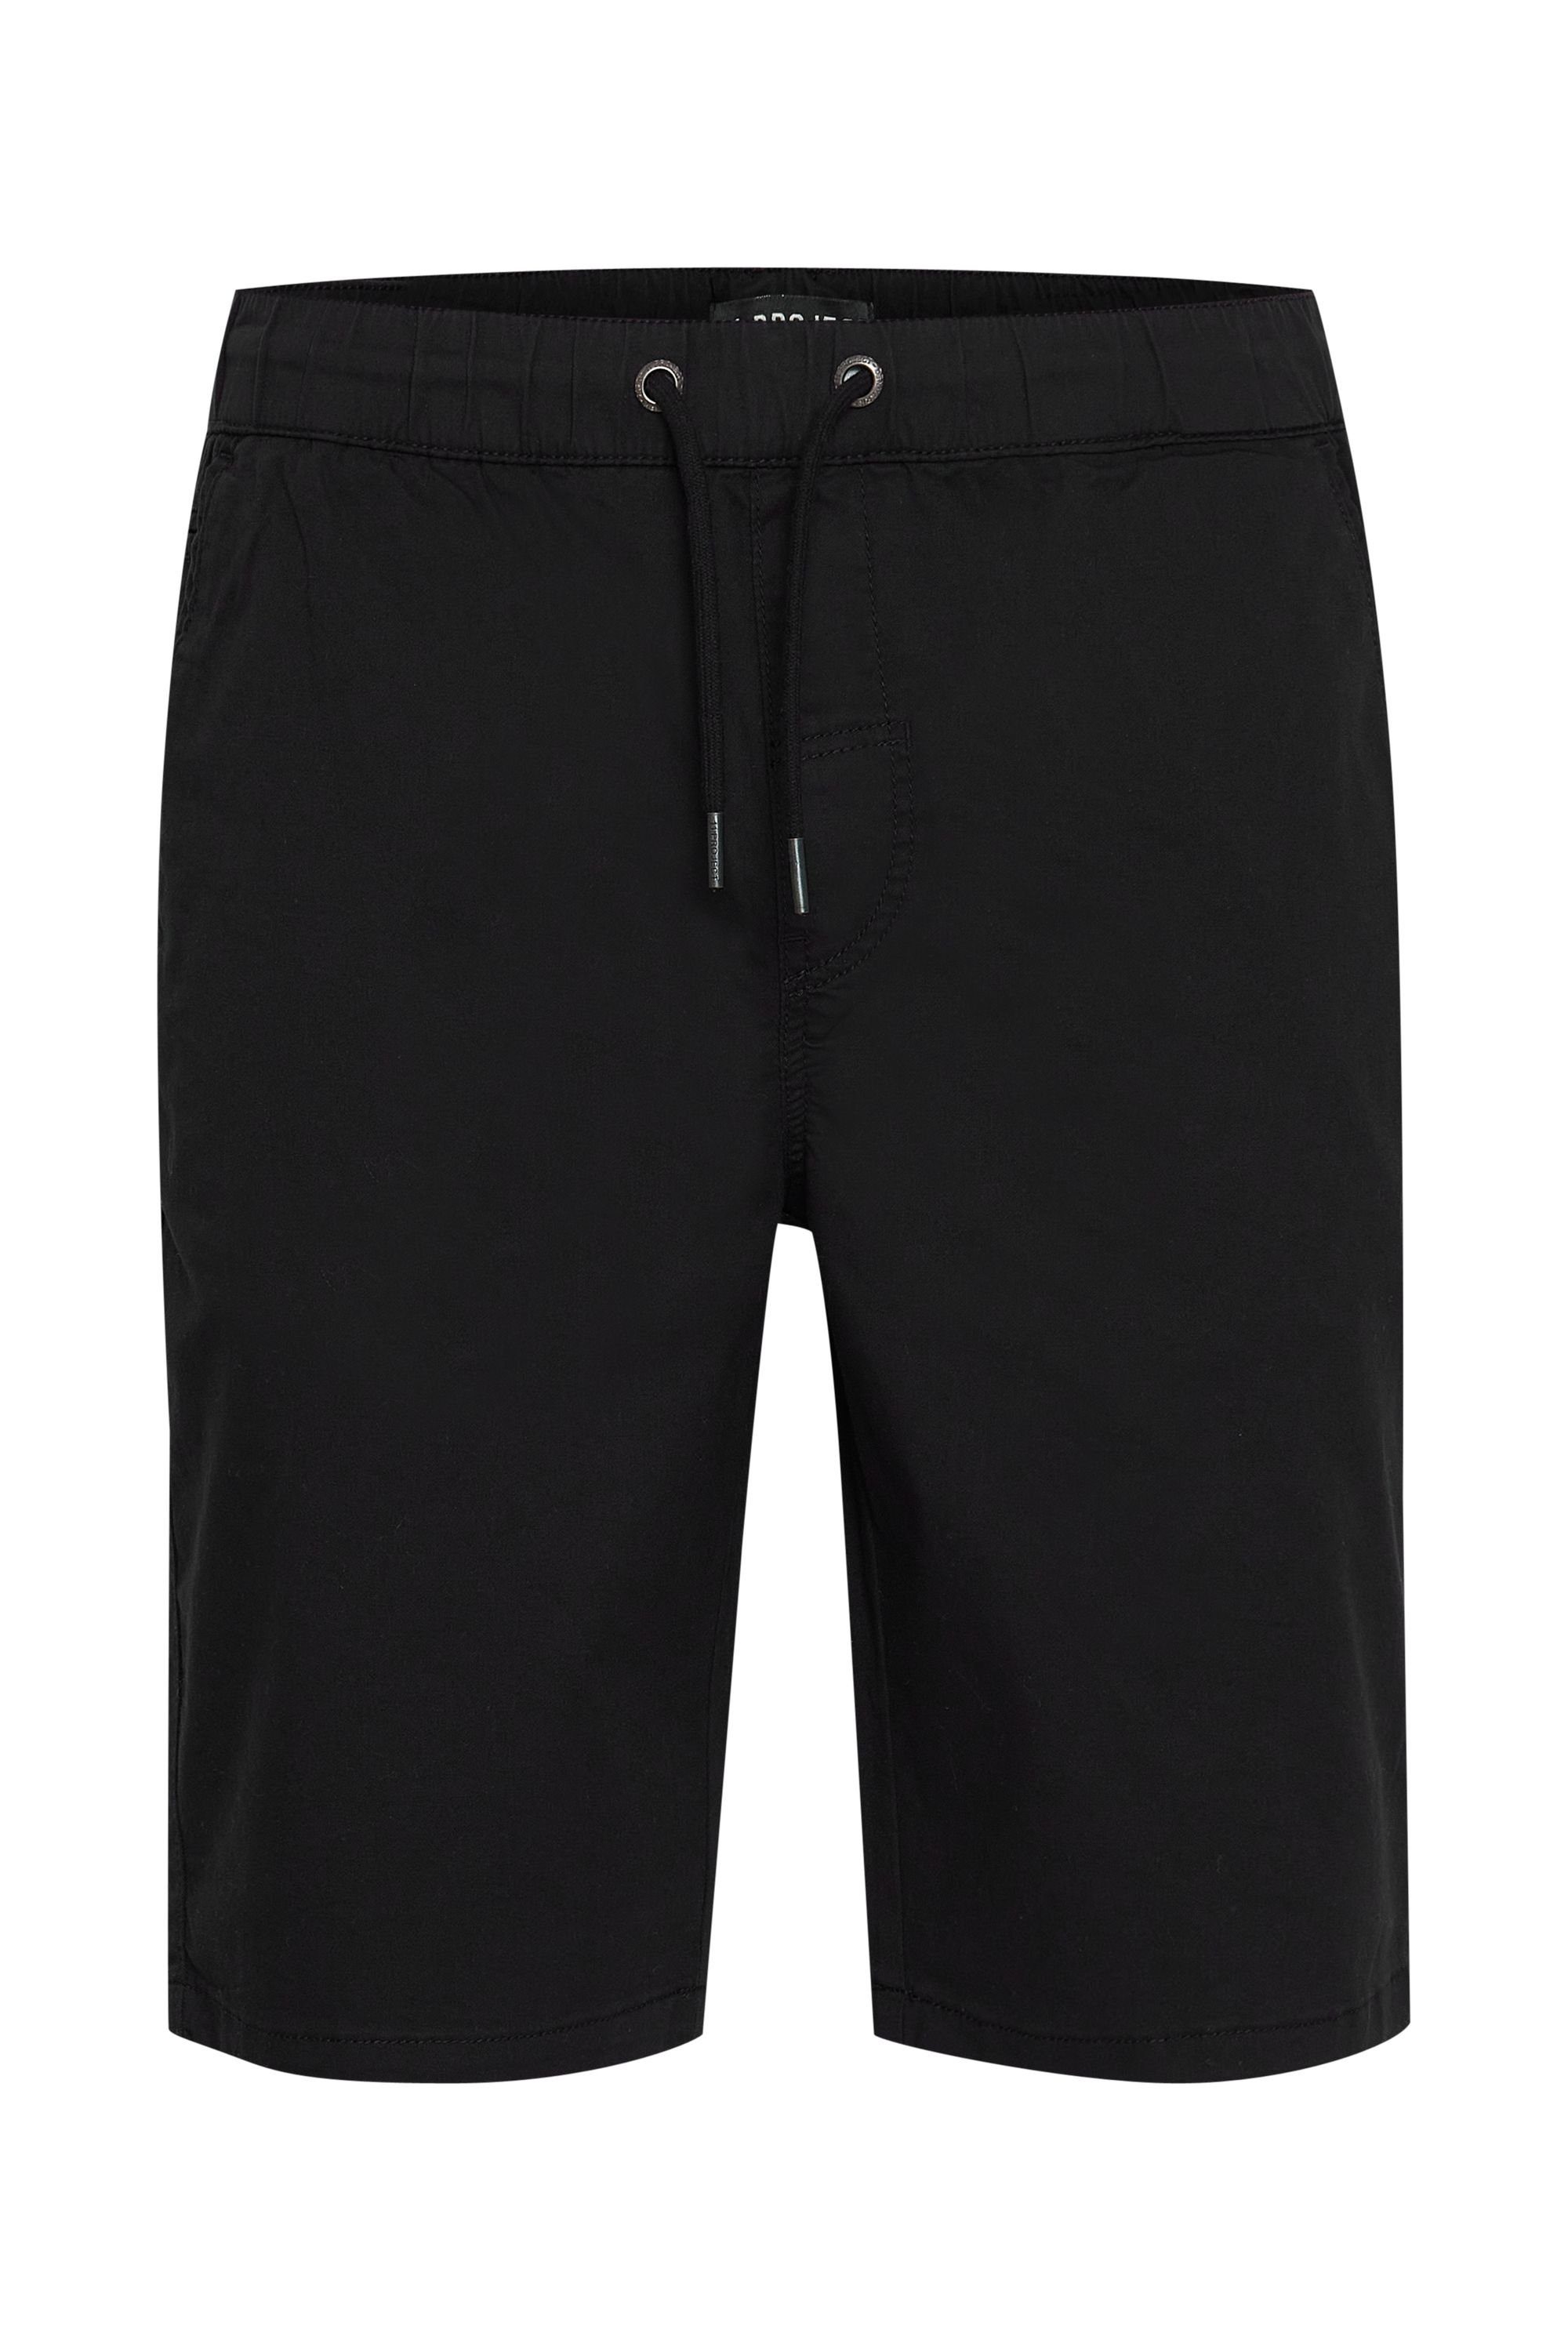 Project 11 Project Black PRLuno Shorts 11